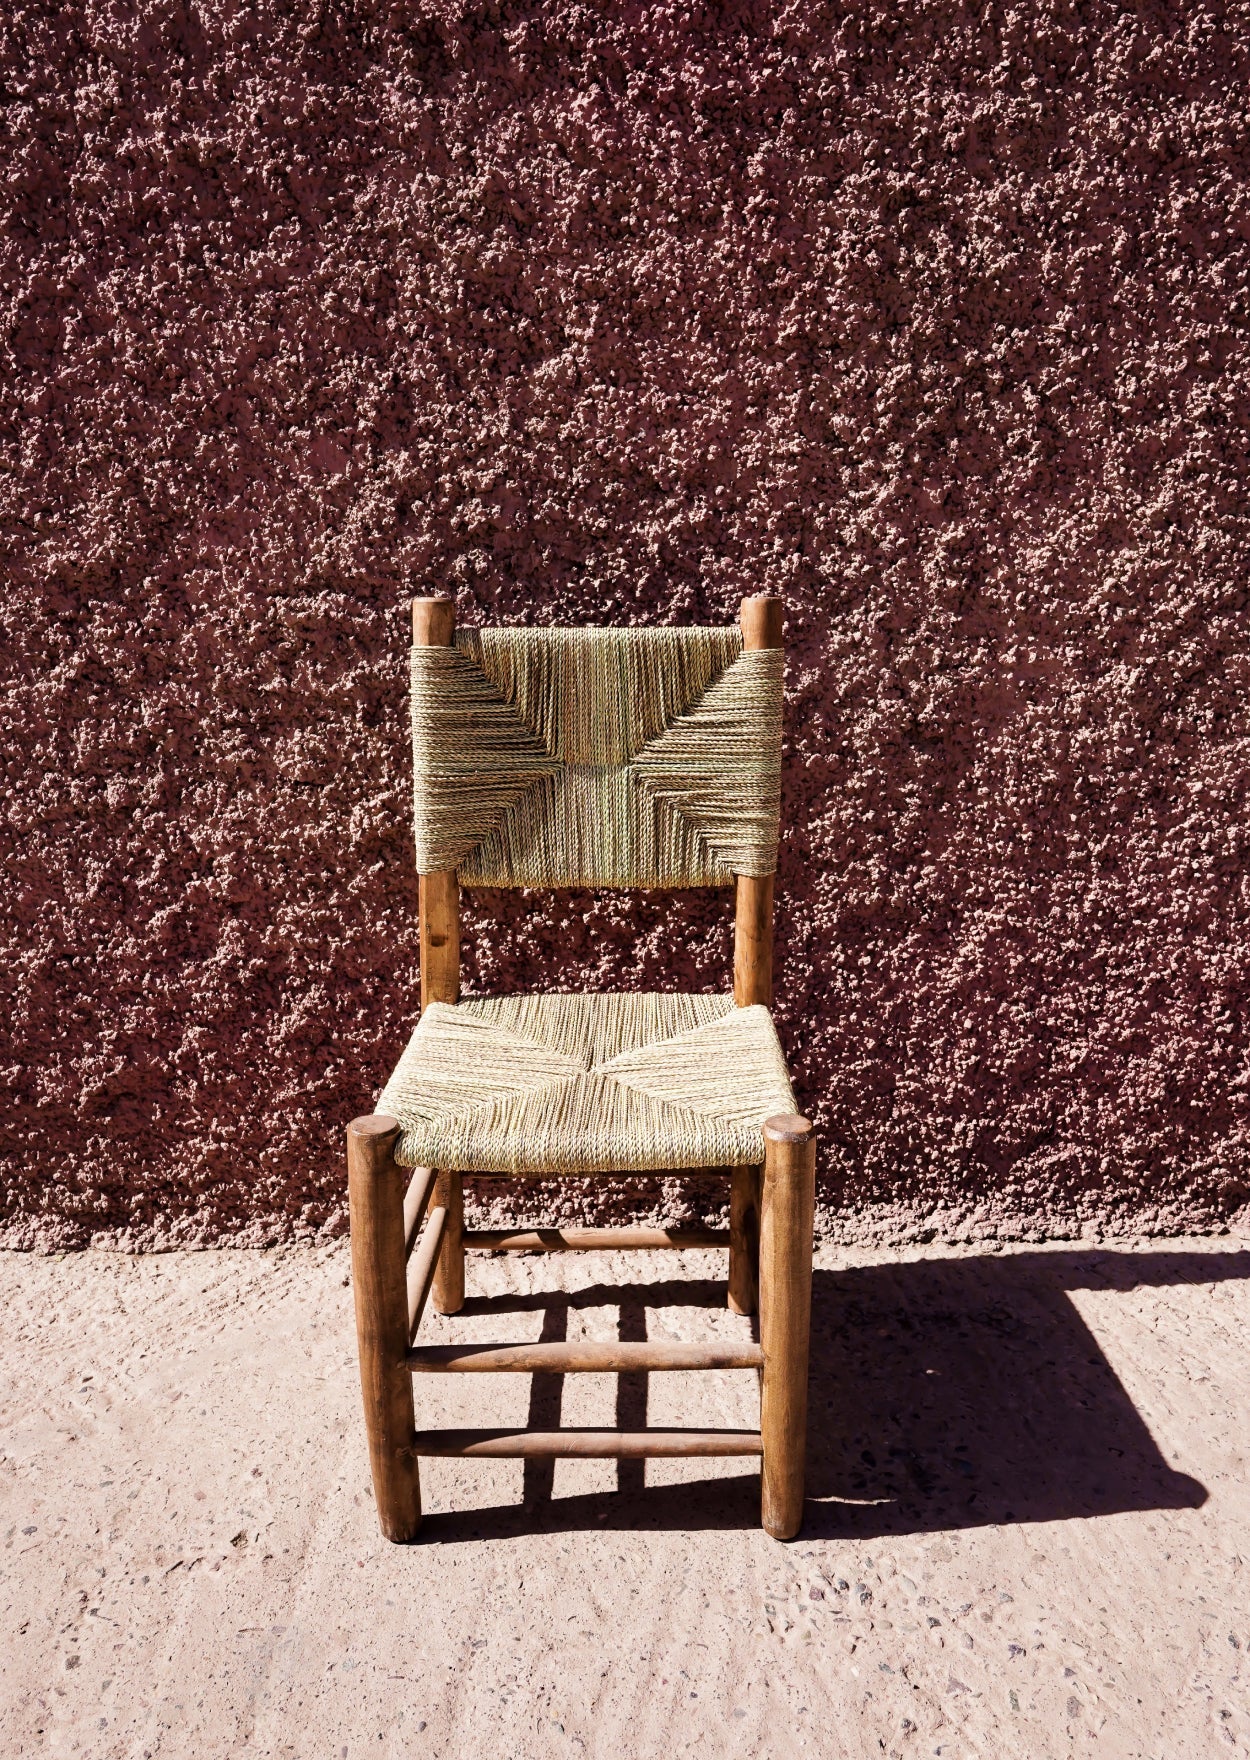 Parcelle Straw Chair